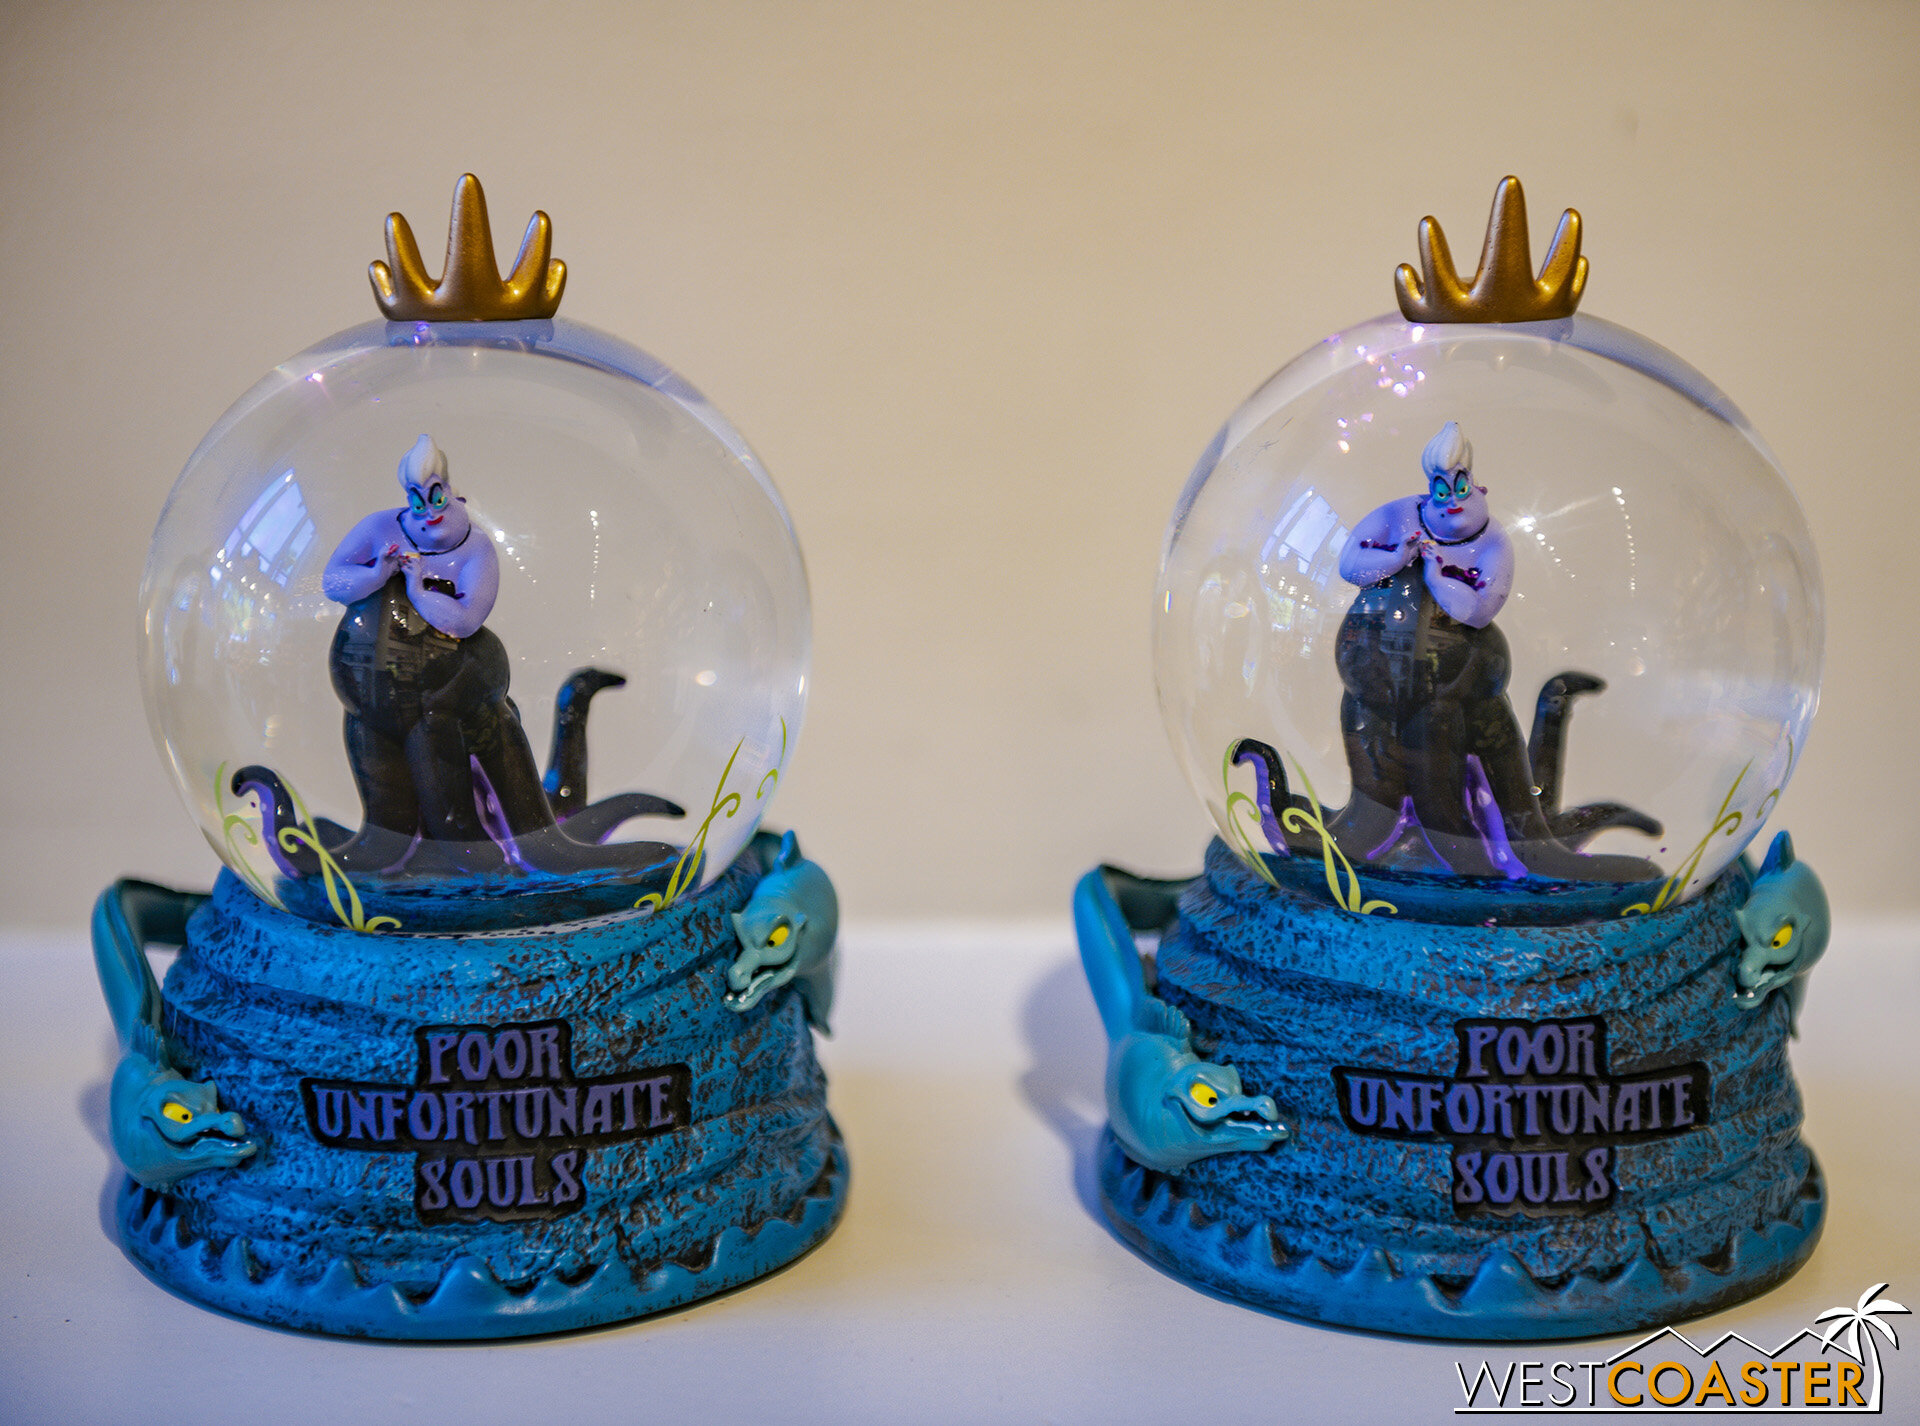  Not necessarily Halloween, but this Ursula snowglobe looked cool. 